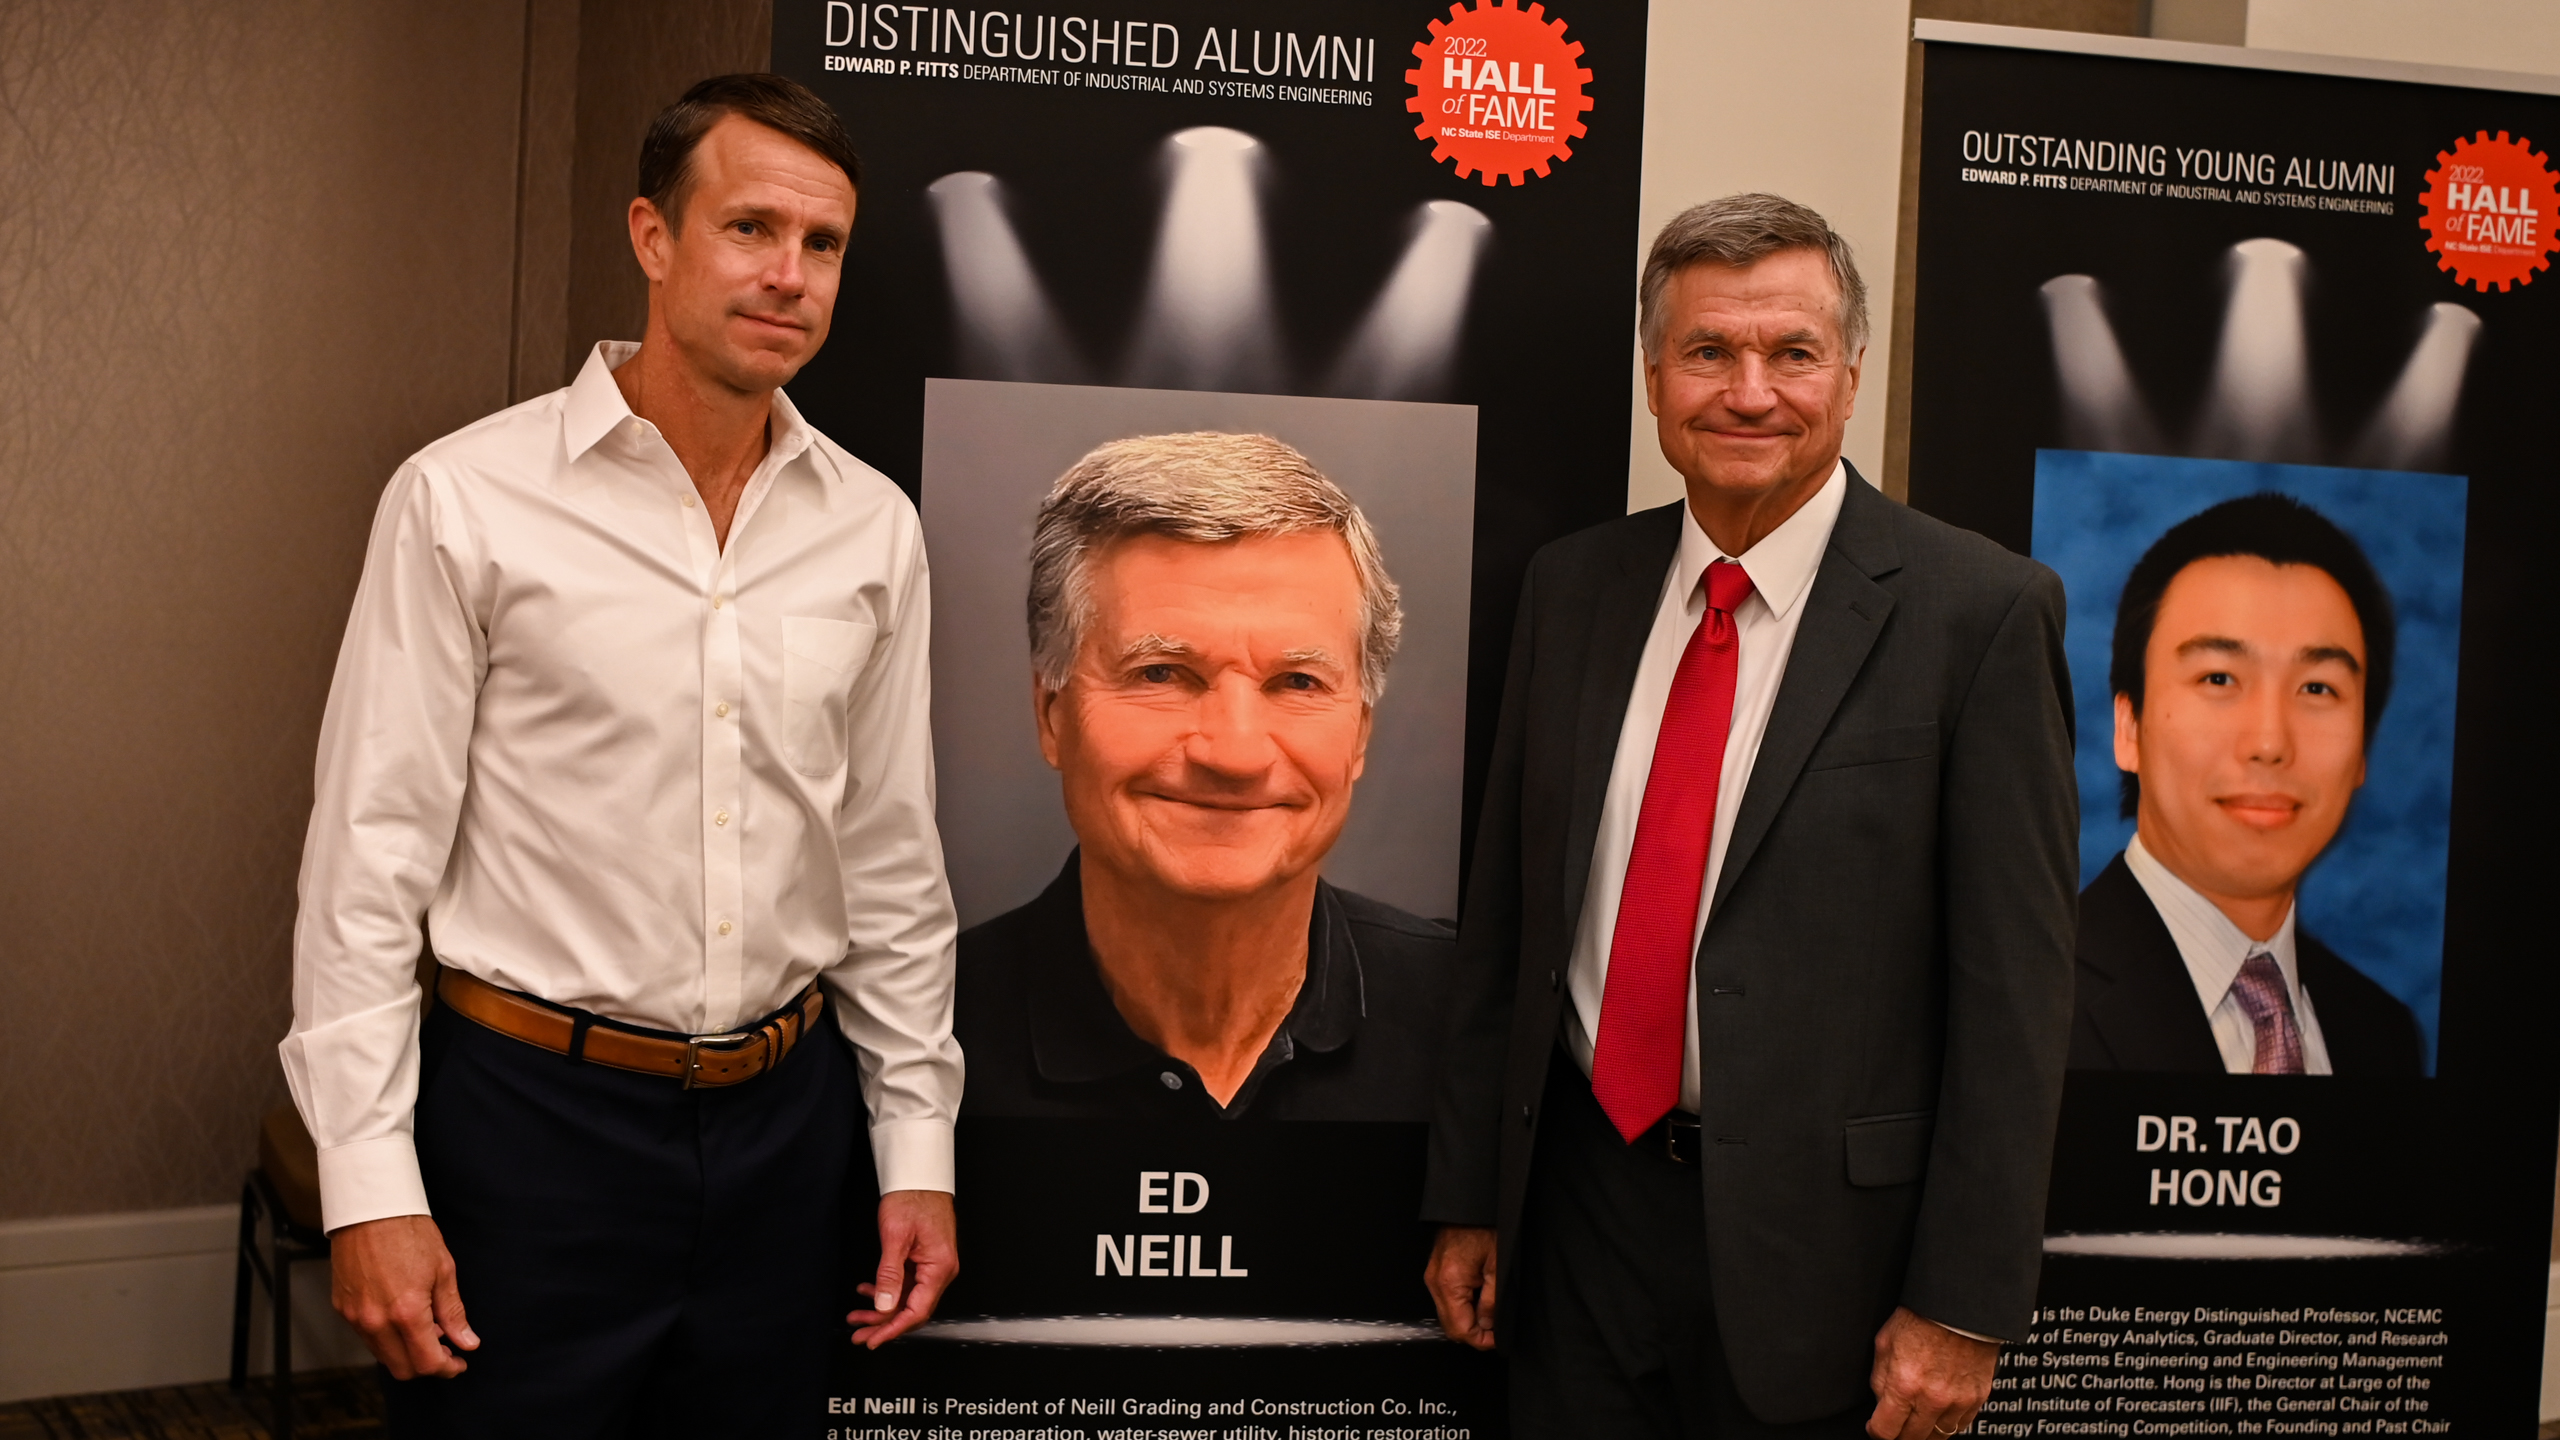 Ed Neill and his son posing in front of Ed's Distinguished Alumni banner